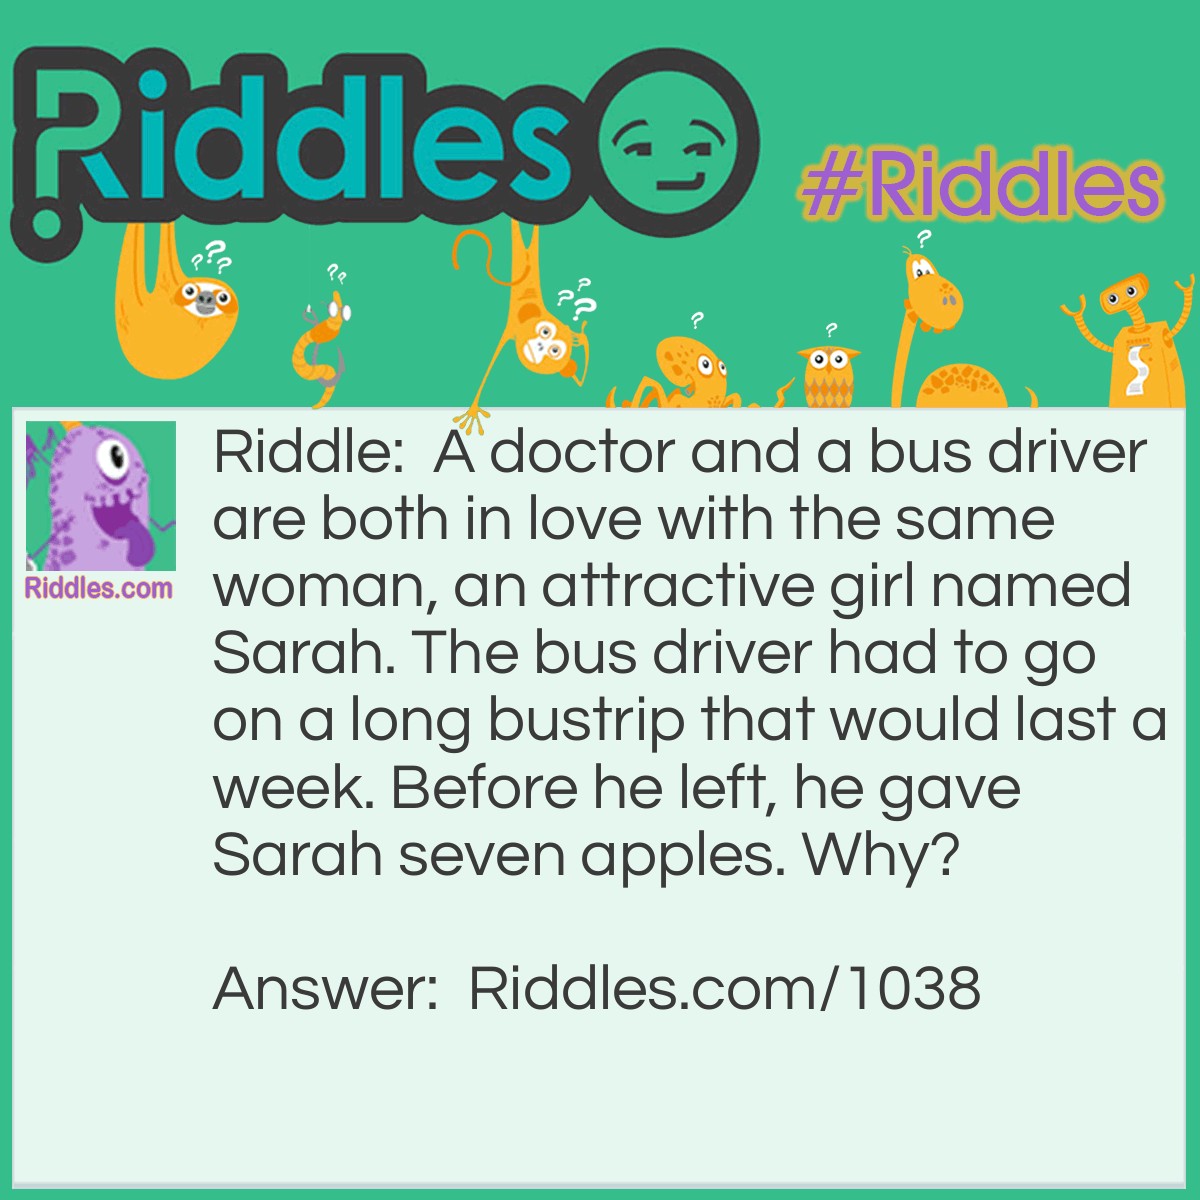 Riddle: A doctor and a bus driver are both in love with the same woman, an attractive girl named Sarah. The bus driver had to go on a long bustrip that would last a week. Before he left, he gave Sarah seven apples. Why? Answer: An Apple A Day Keeps The Doctor Away!